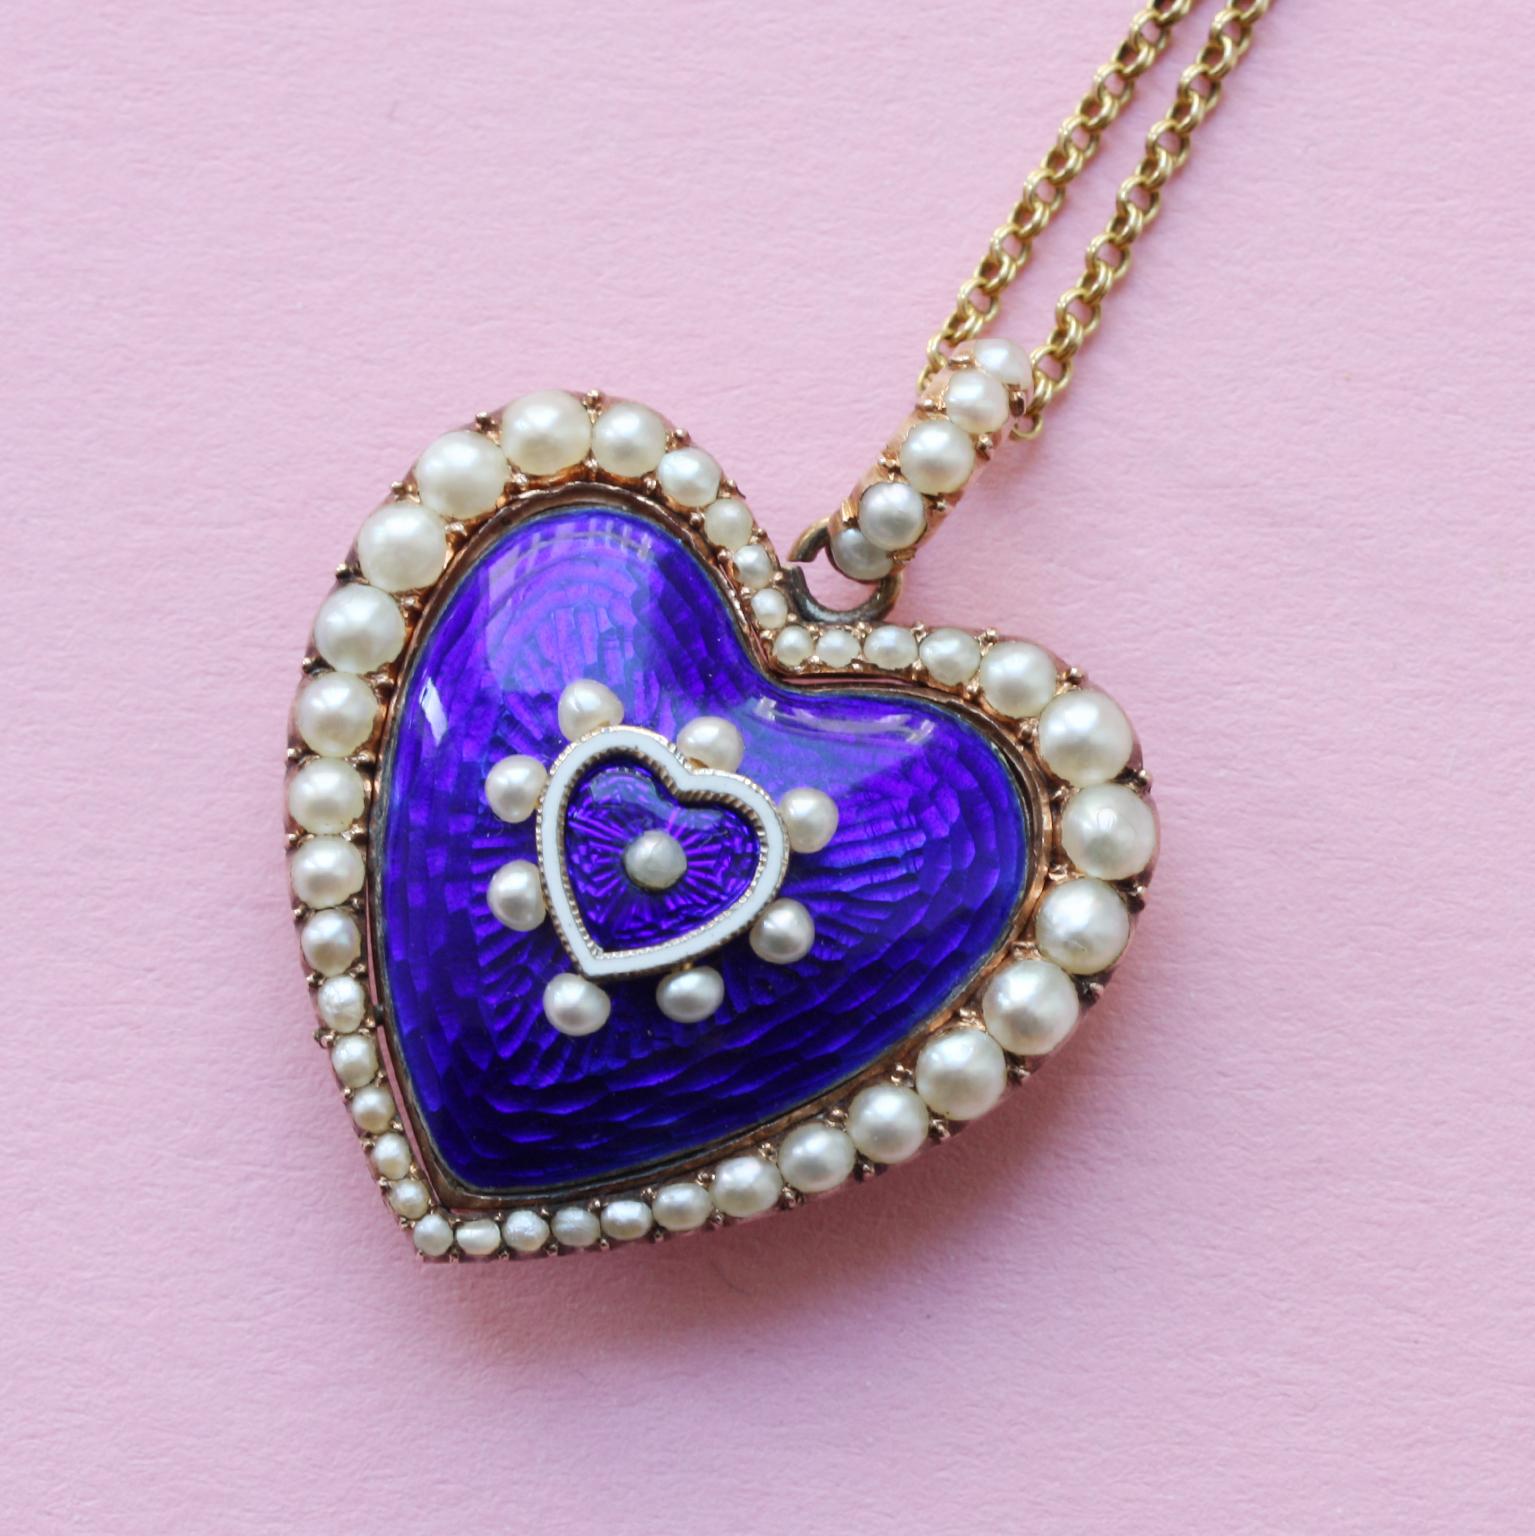 A 15 carat gold large blue enamel and pearl heart shaped Victorian locket, circa 1880, England, visible repairs at the back.

weight: 11.52 grams
dimensions: 2.8 x 3.4 cm